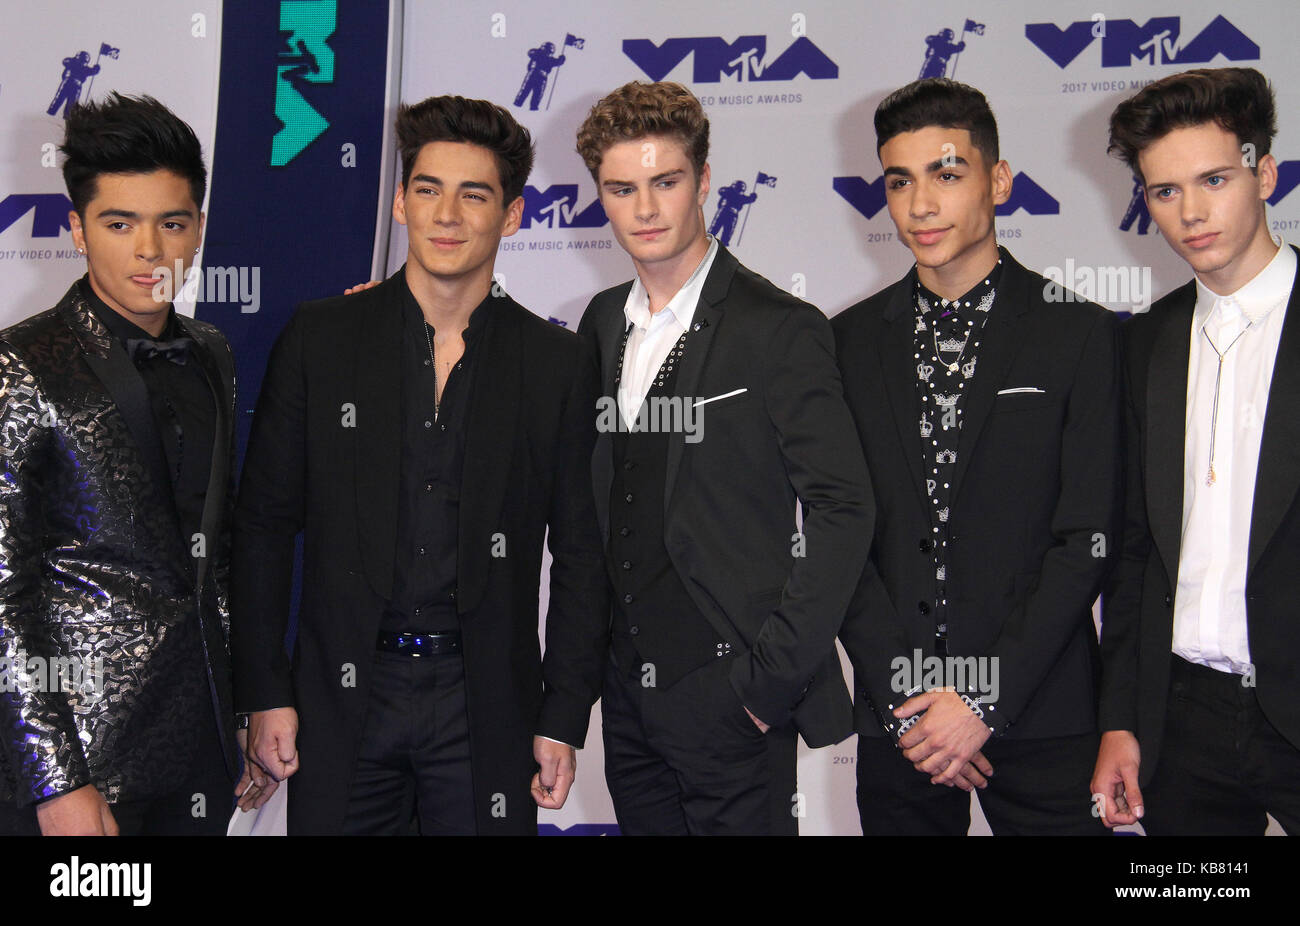 MTV Video Music Awards (VMA) 2017 Arrivals held at the Forum in Inglewood, California.  Featuring: Brady Tutton, Drew Ramos, Chance Perez, Sergio Calderon, Michael of ‘In Real Life’ Where: Los Angeles, California, United States When: 26 Aug 2017 Credit: Adriana M. Barraza/WENN.com Stock Photo